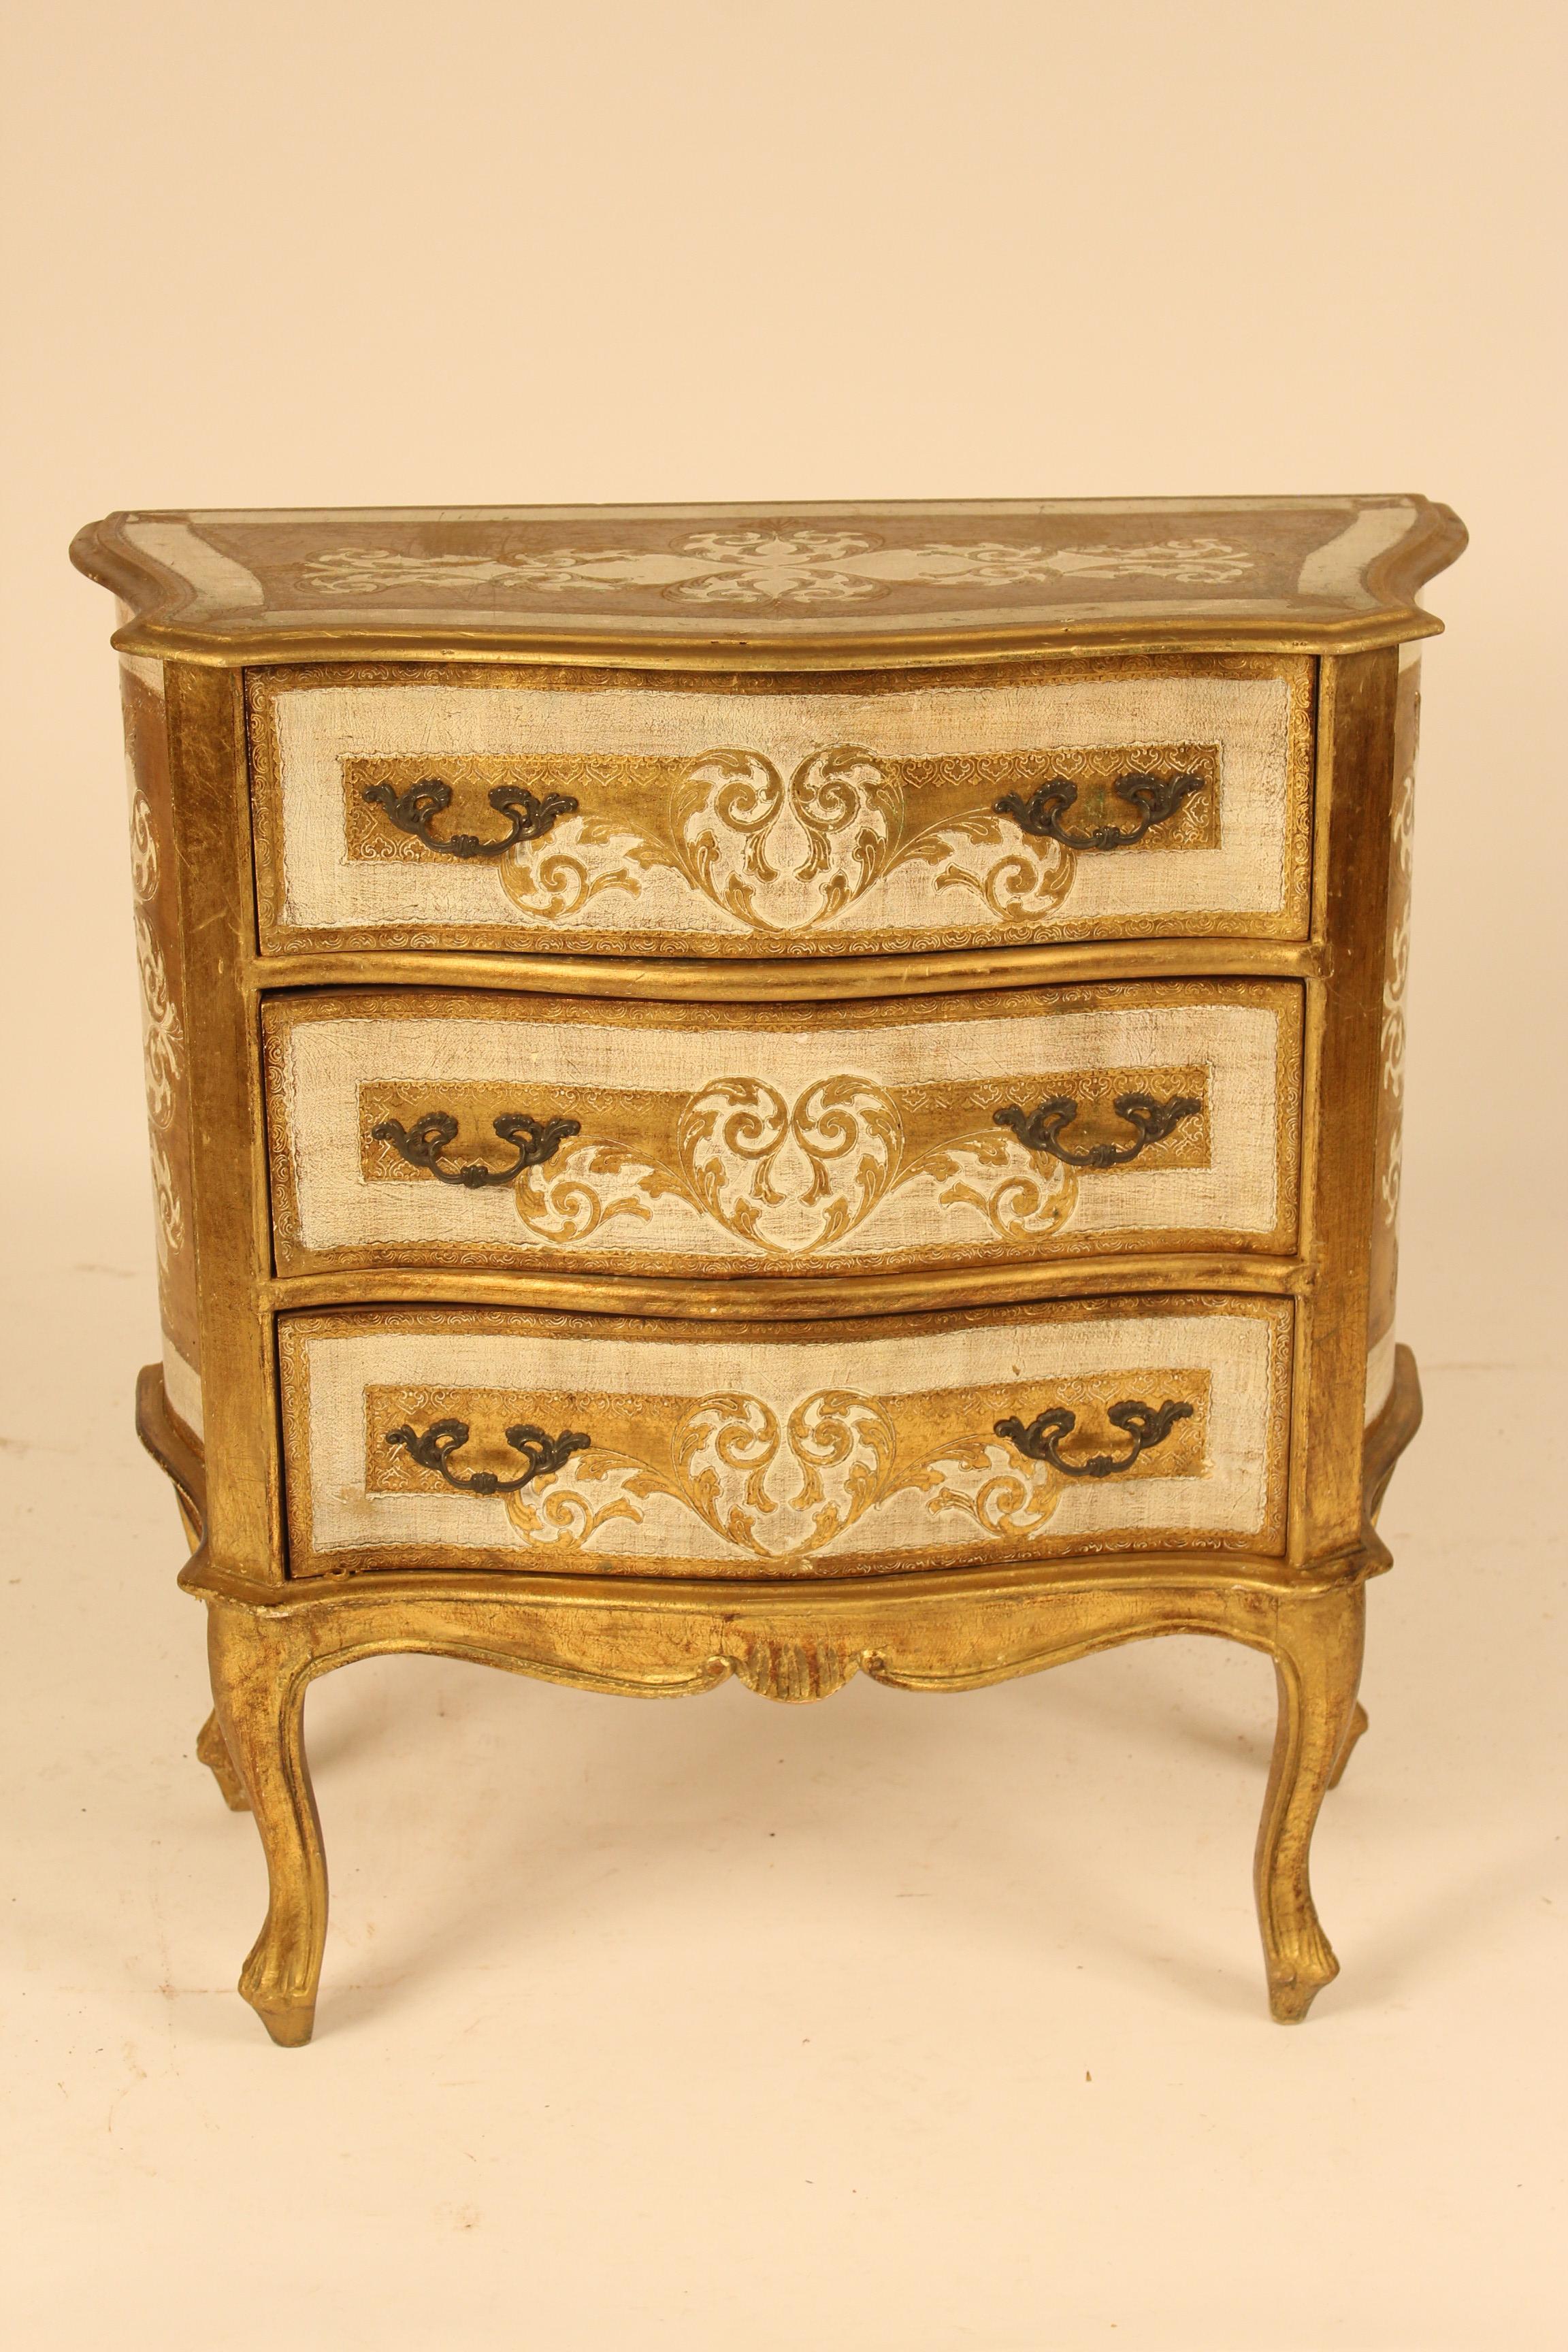 Italian painted and gilt decorated Louis XV style chest of drawers, circa 1960s.